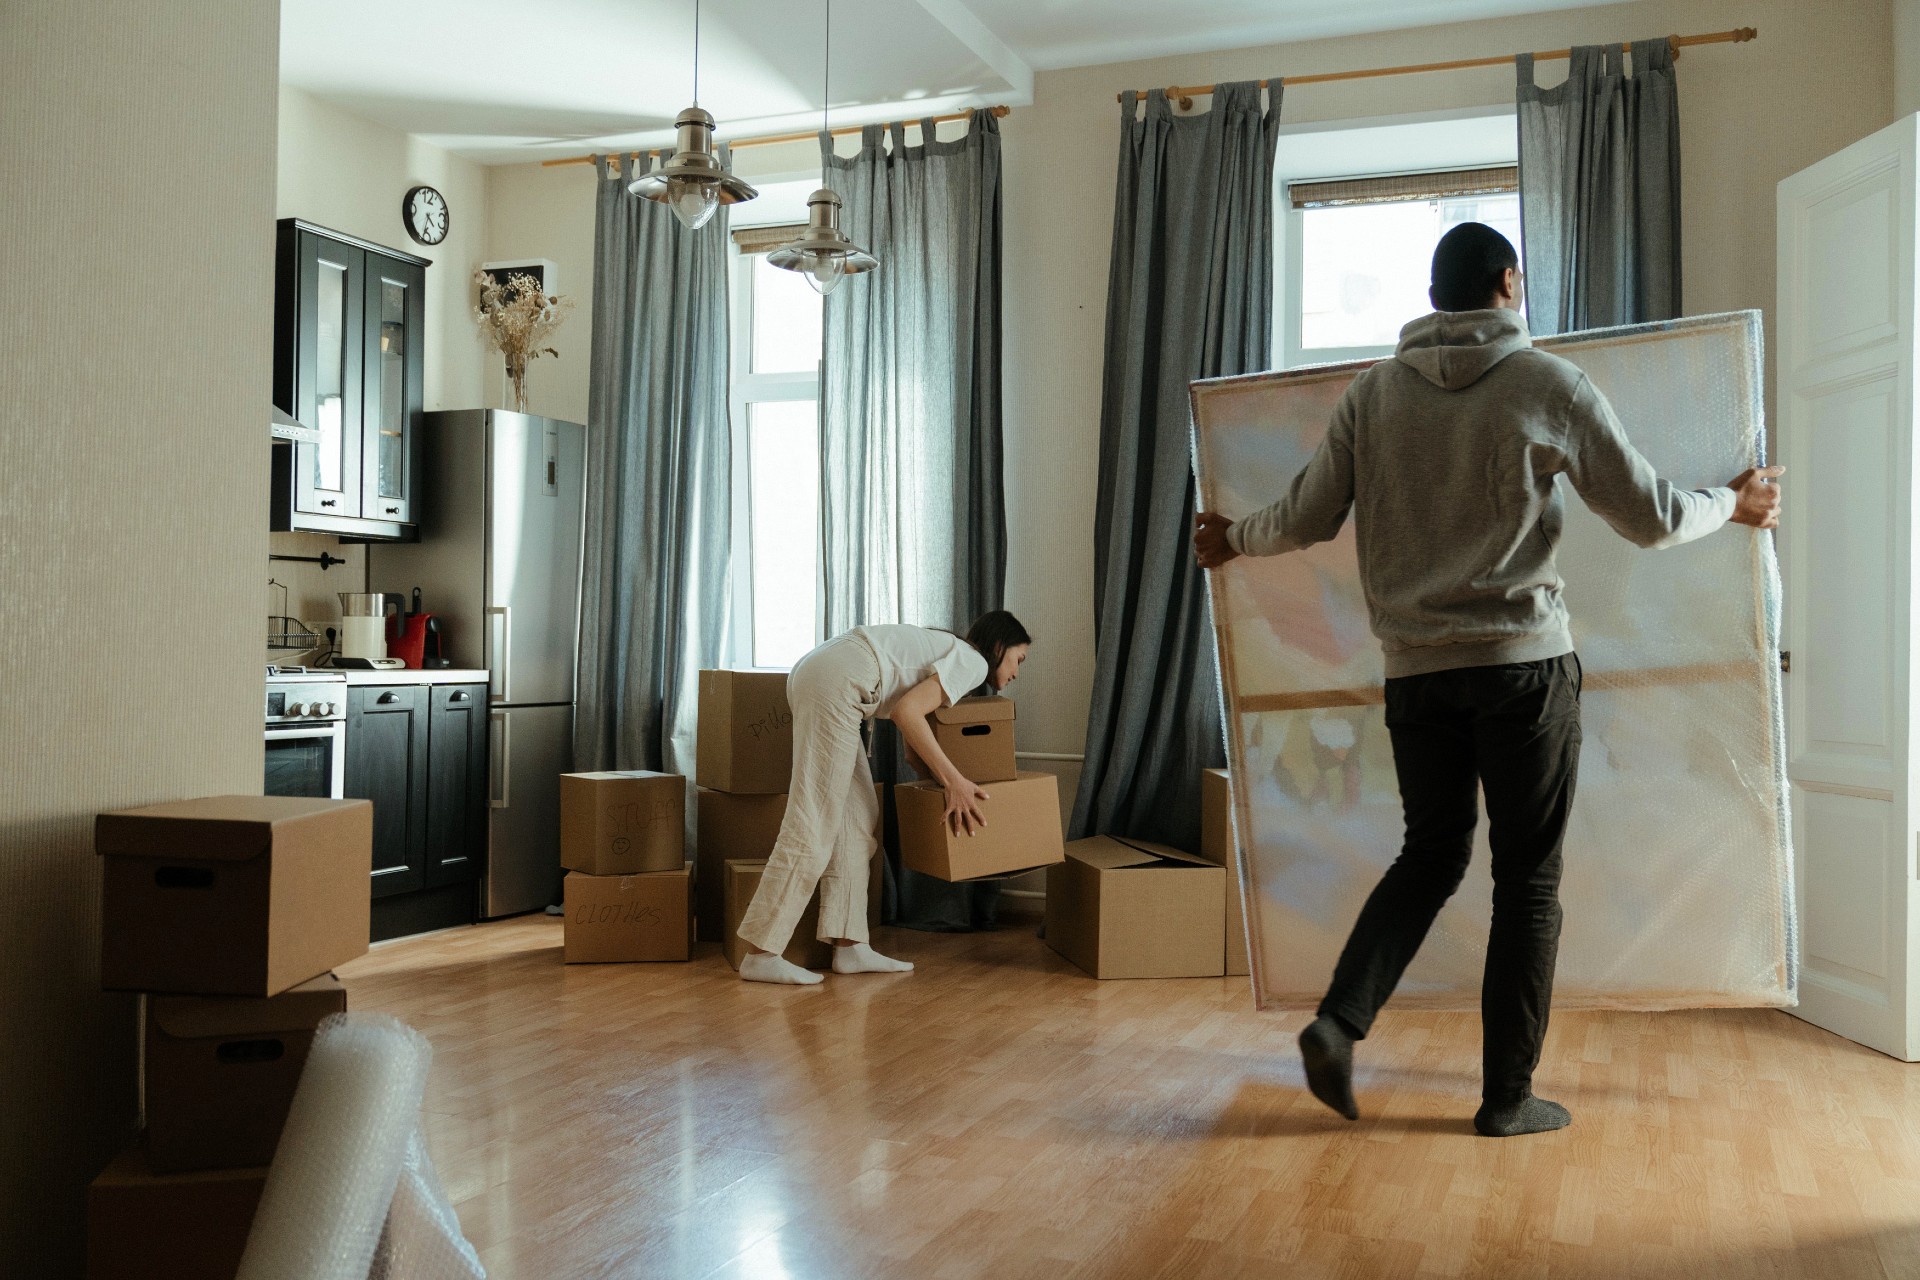 Making a long-distance move is often expensive. The first thing you should do when planning one is to make a checklist and solicit quotes.